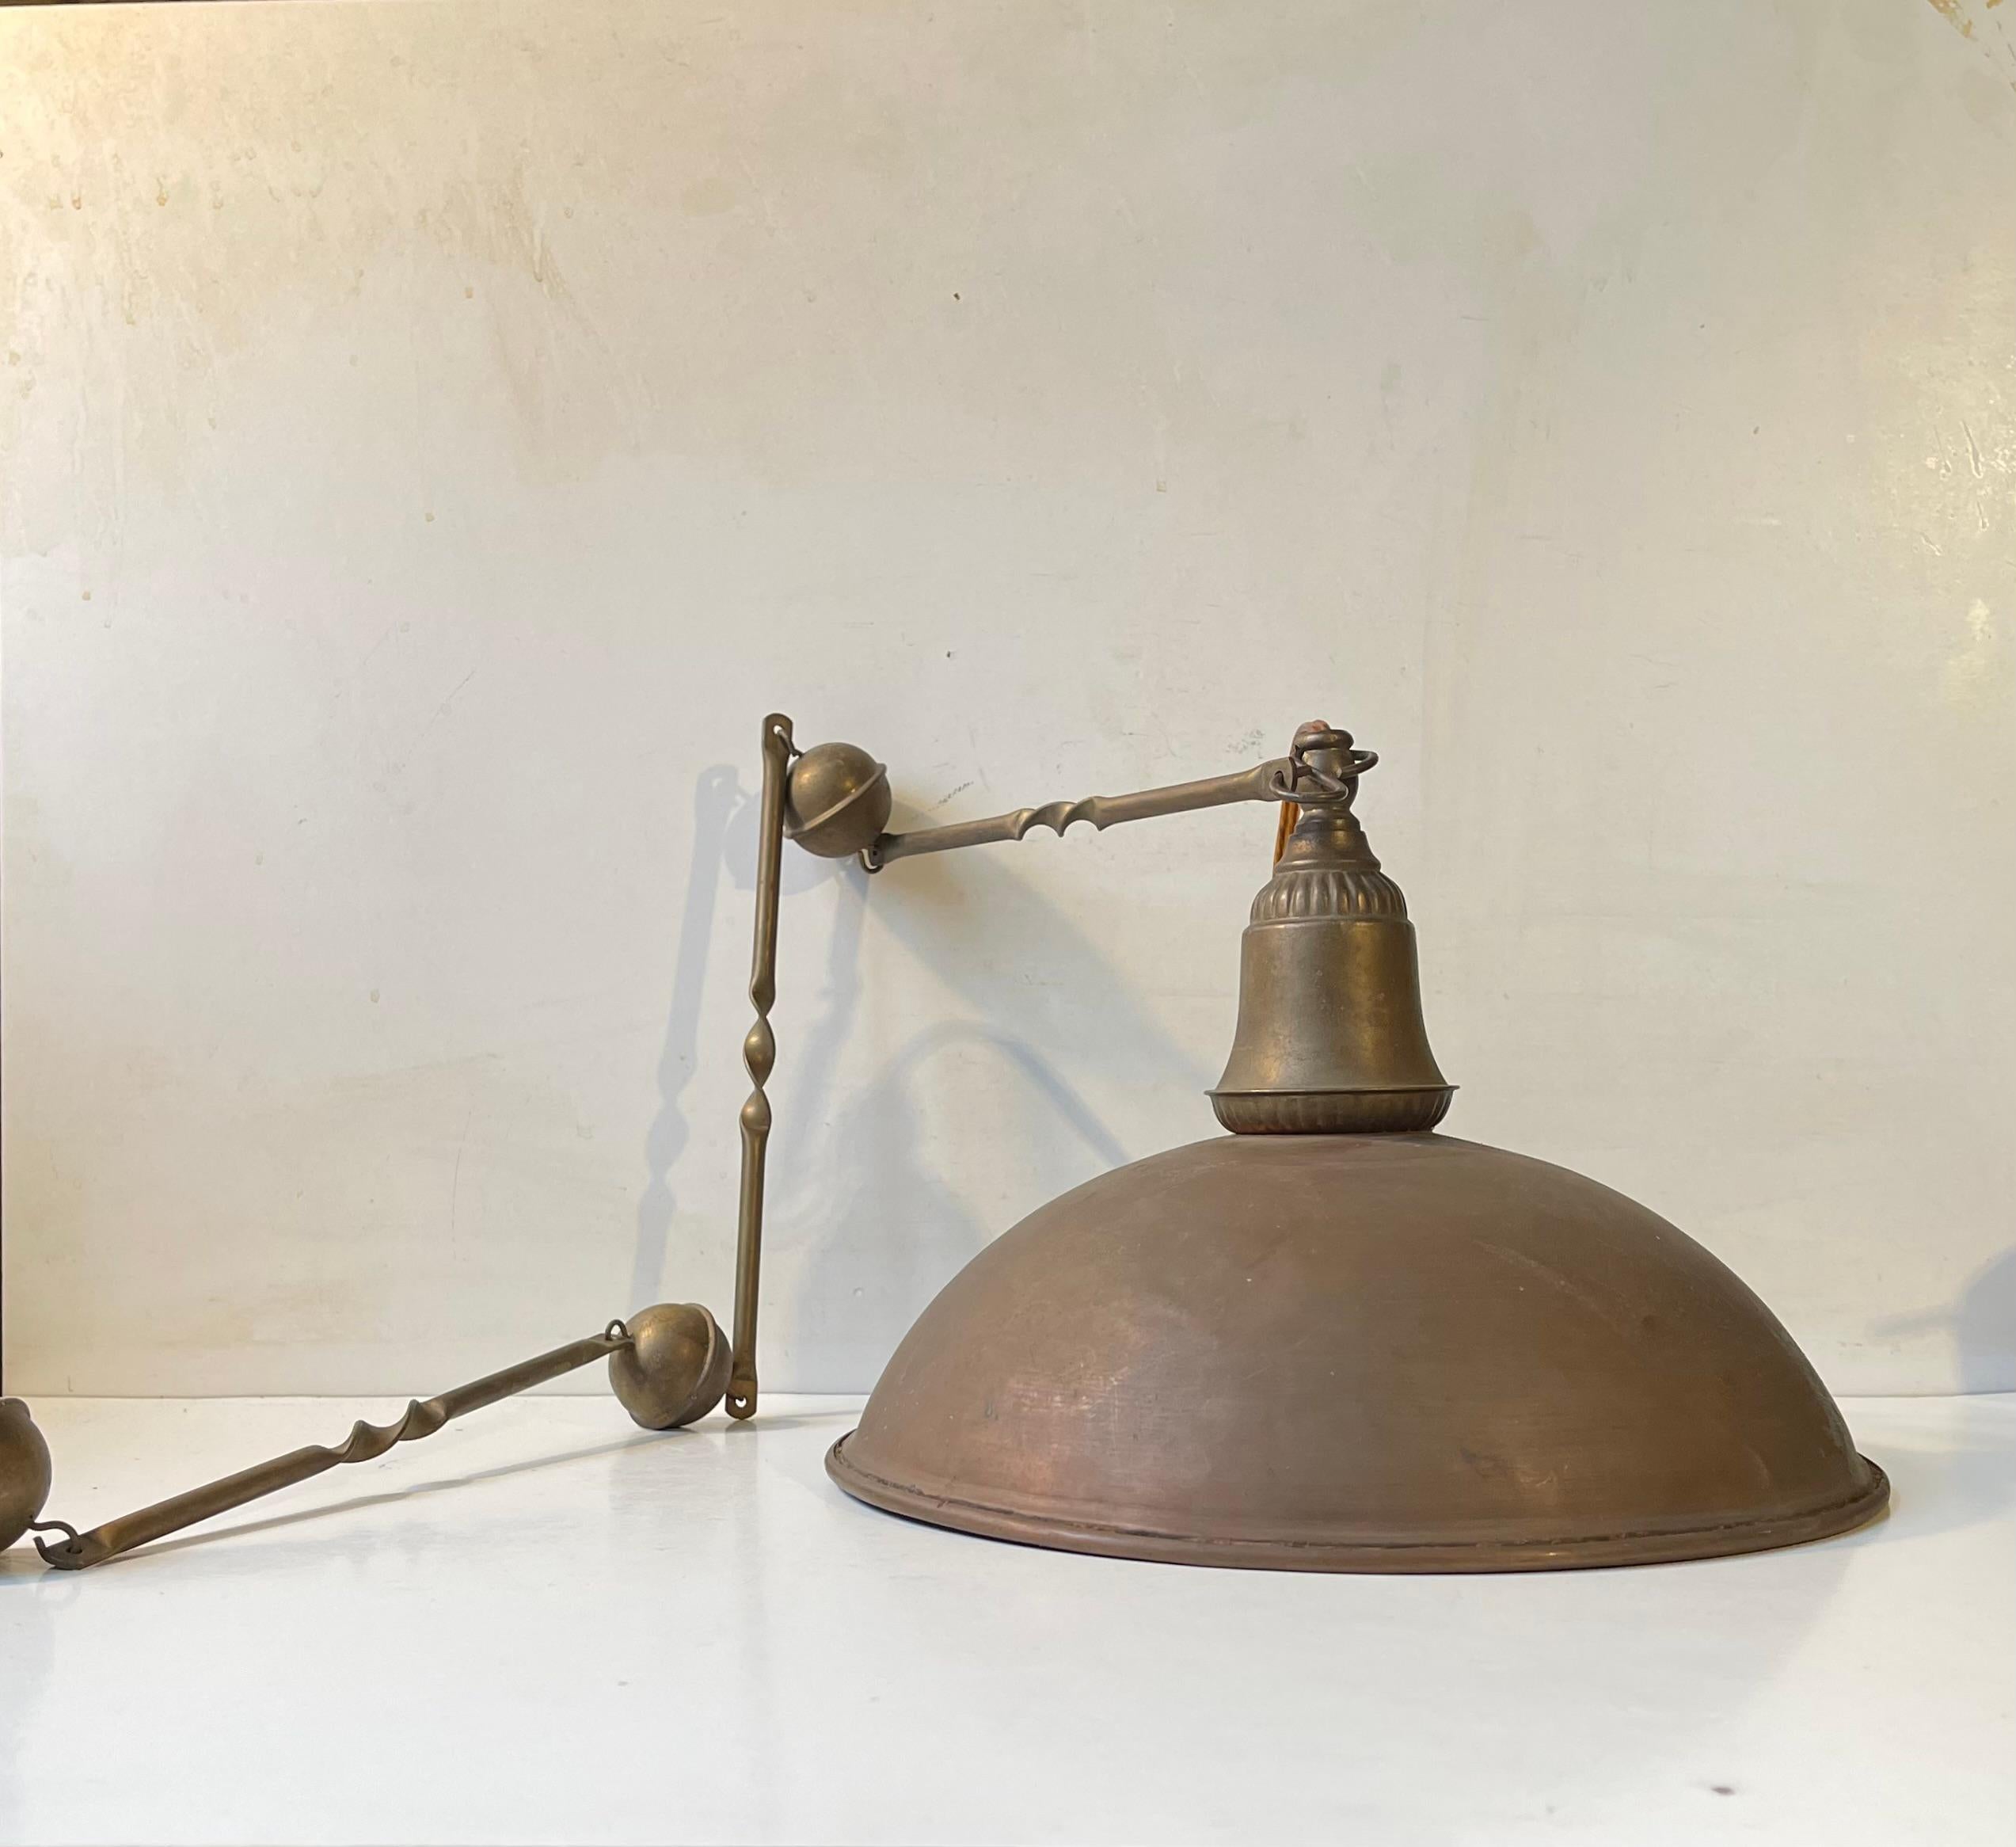 Bauhaus Nautical Chain Suspended Hanging Lamp in Brass and Copper, 1930s For Sale